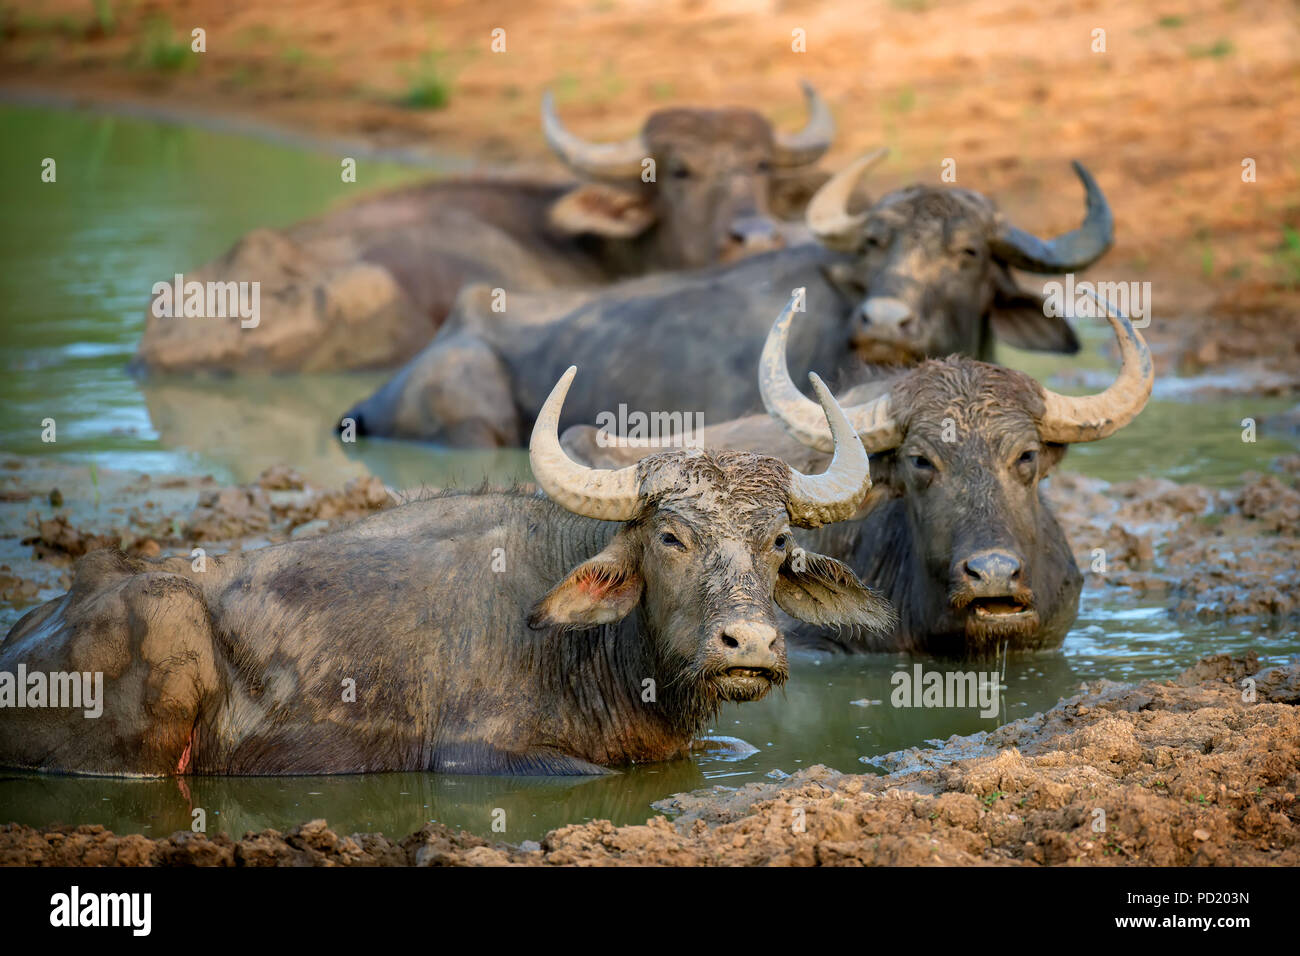 Buffalo Bathing In River Resolution Stock Photography and Images - Alamy